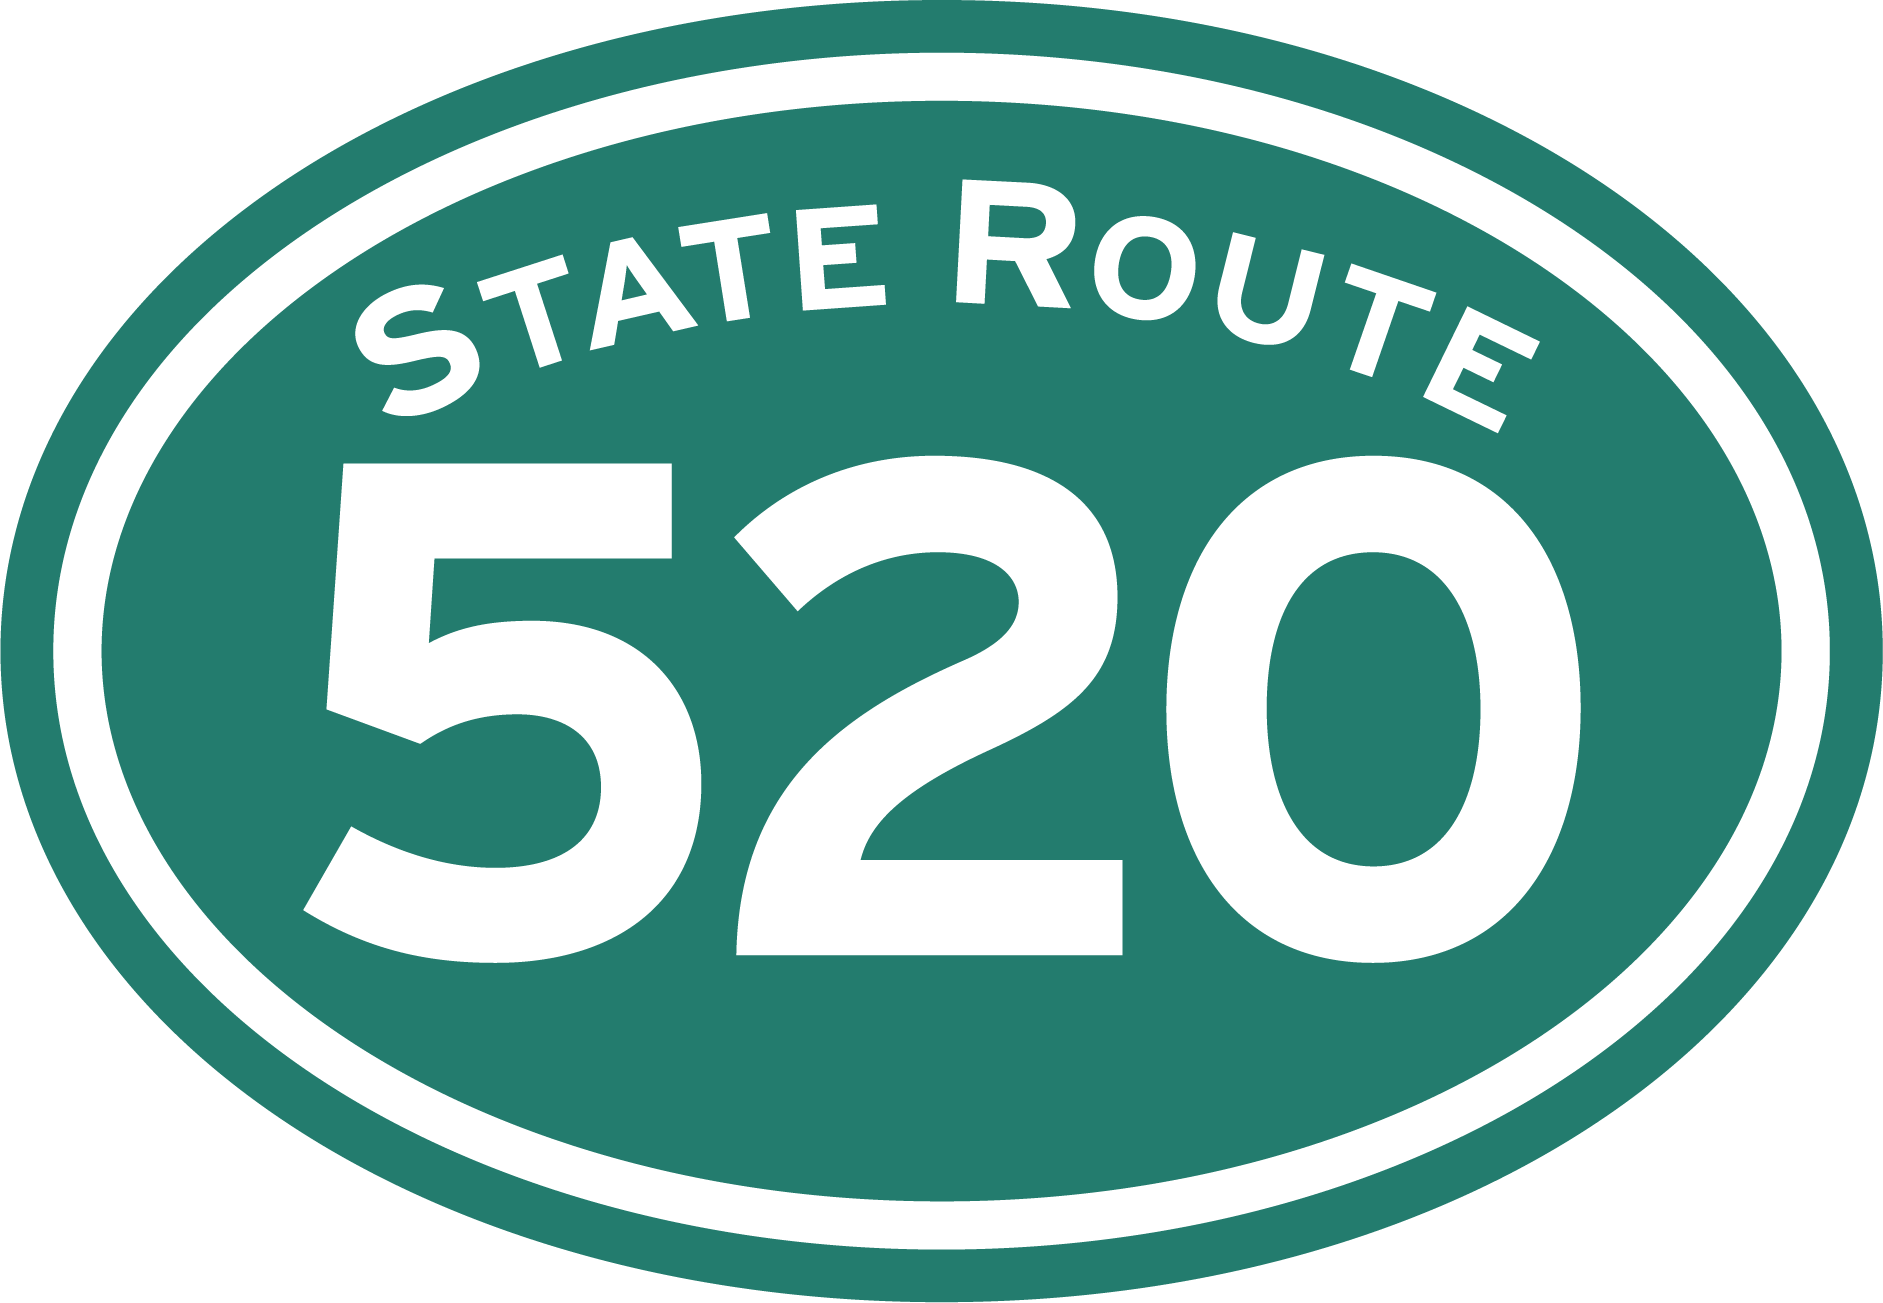 State Route 520 logo